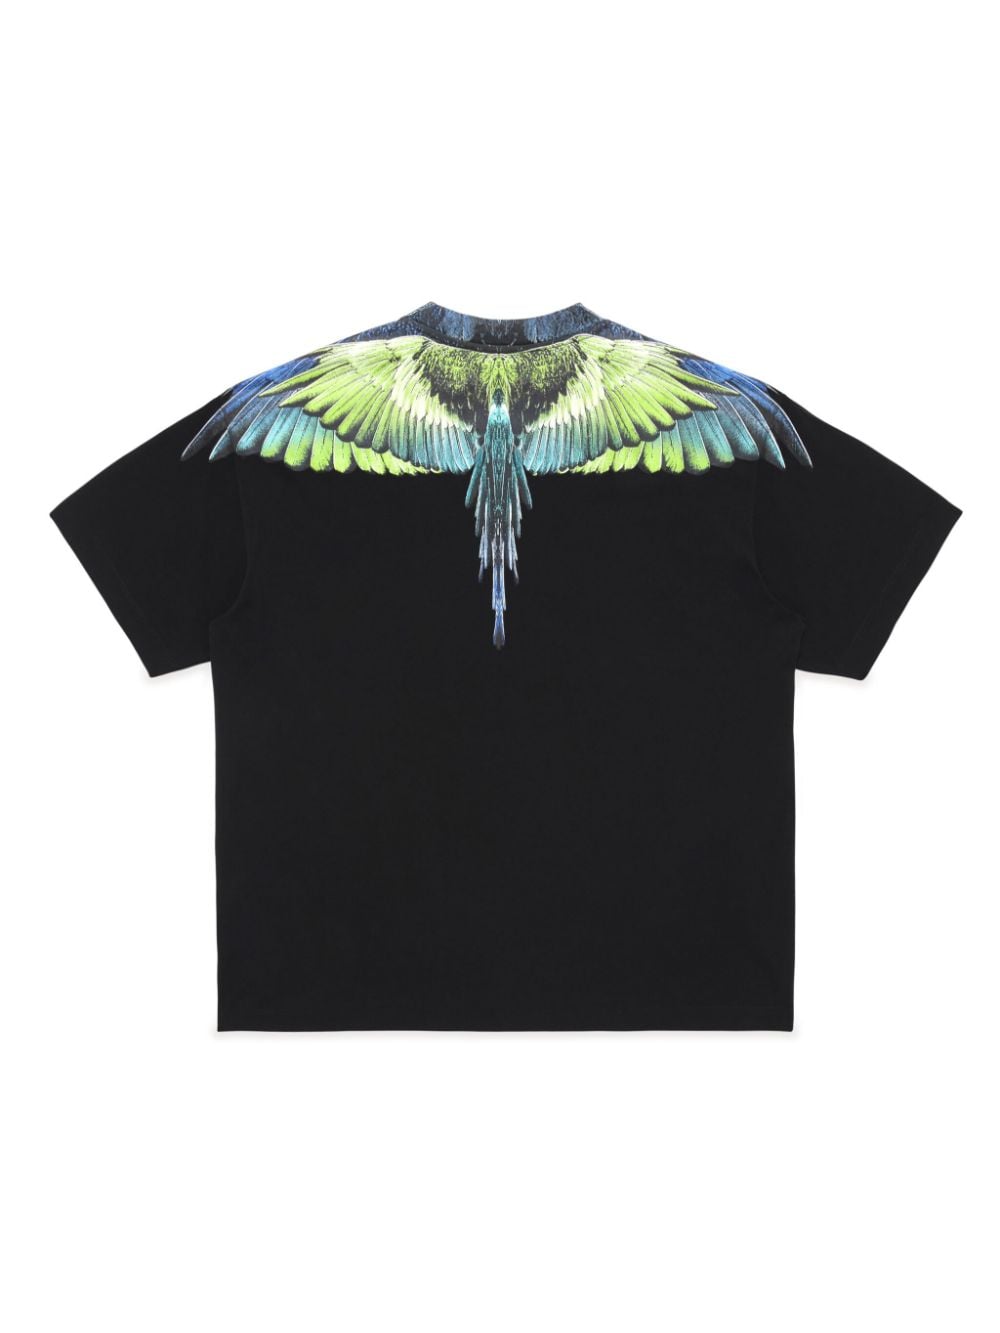 T-shirt nera stampa icon wings verde